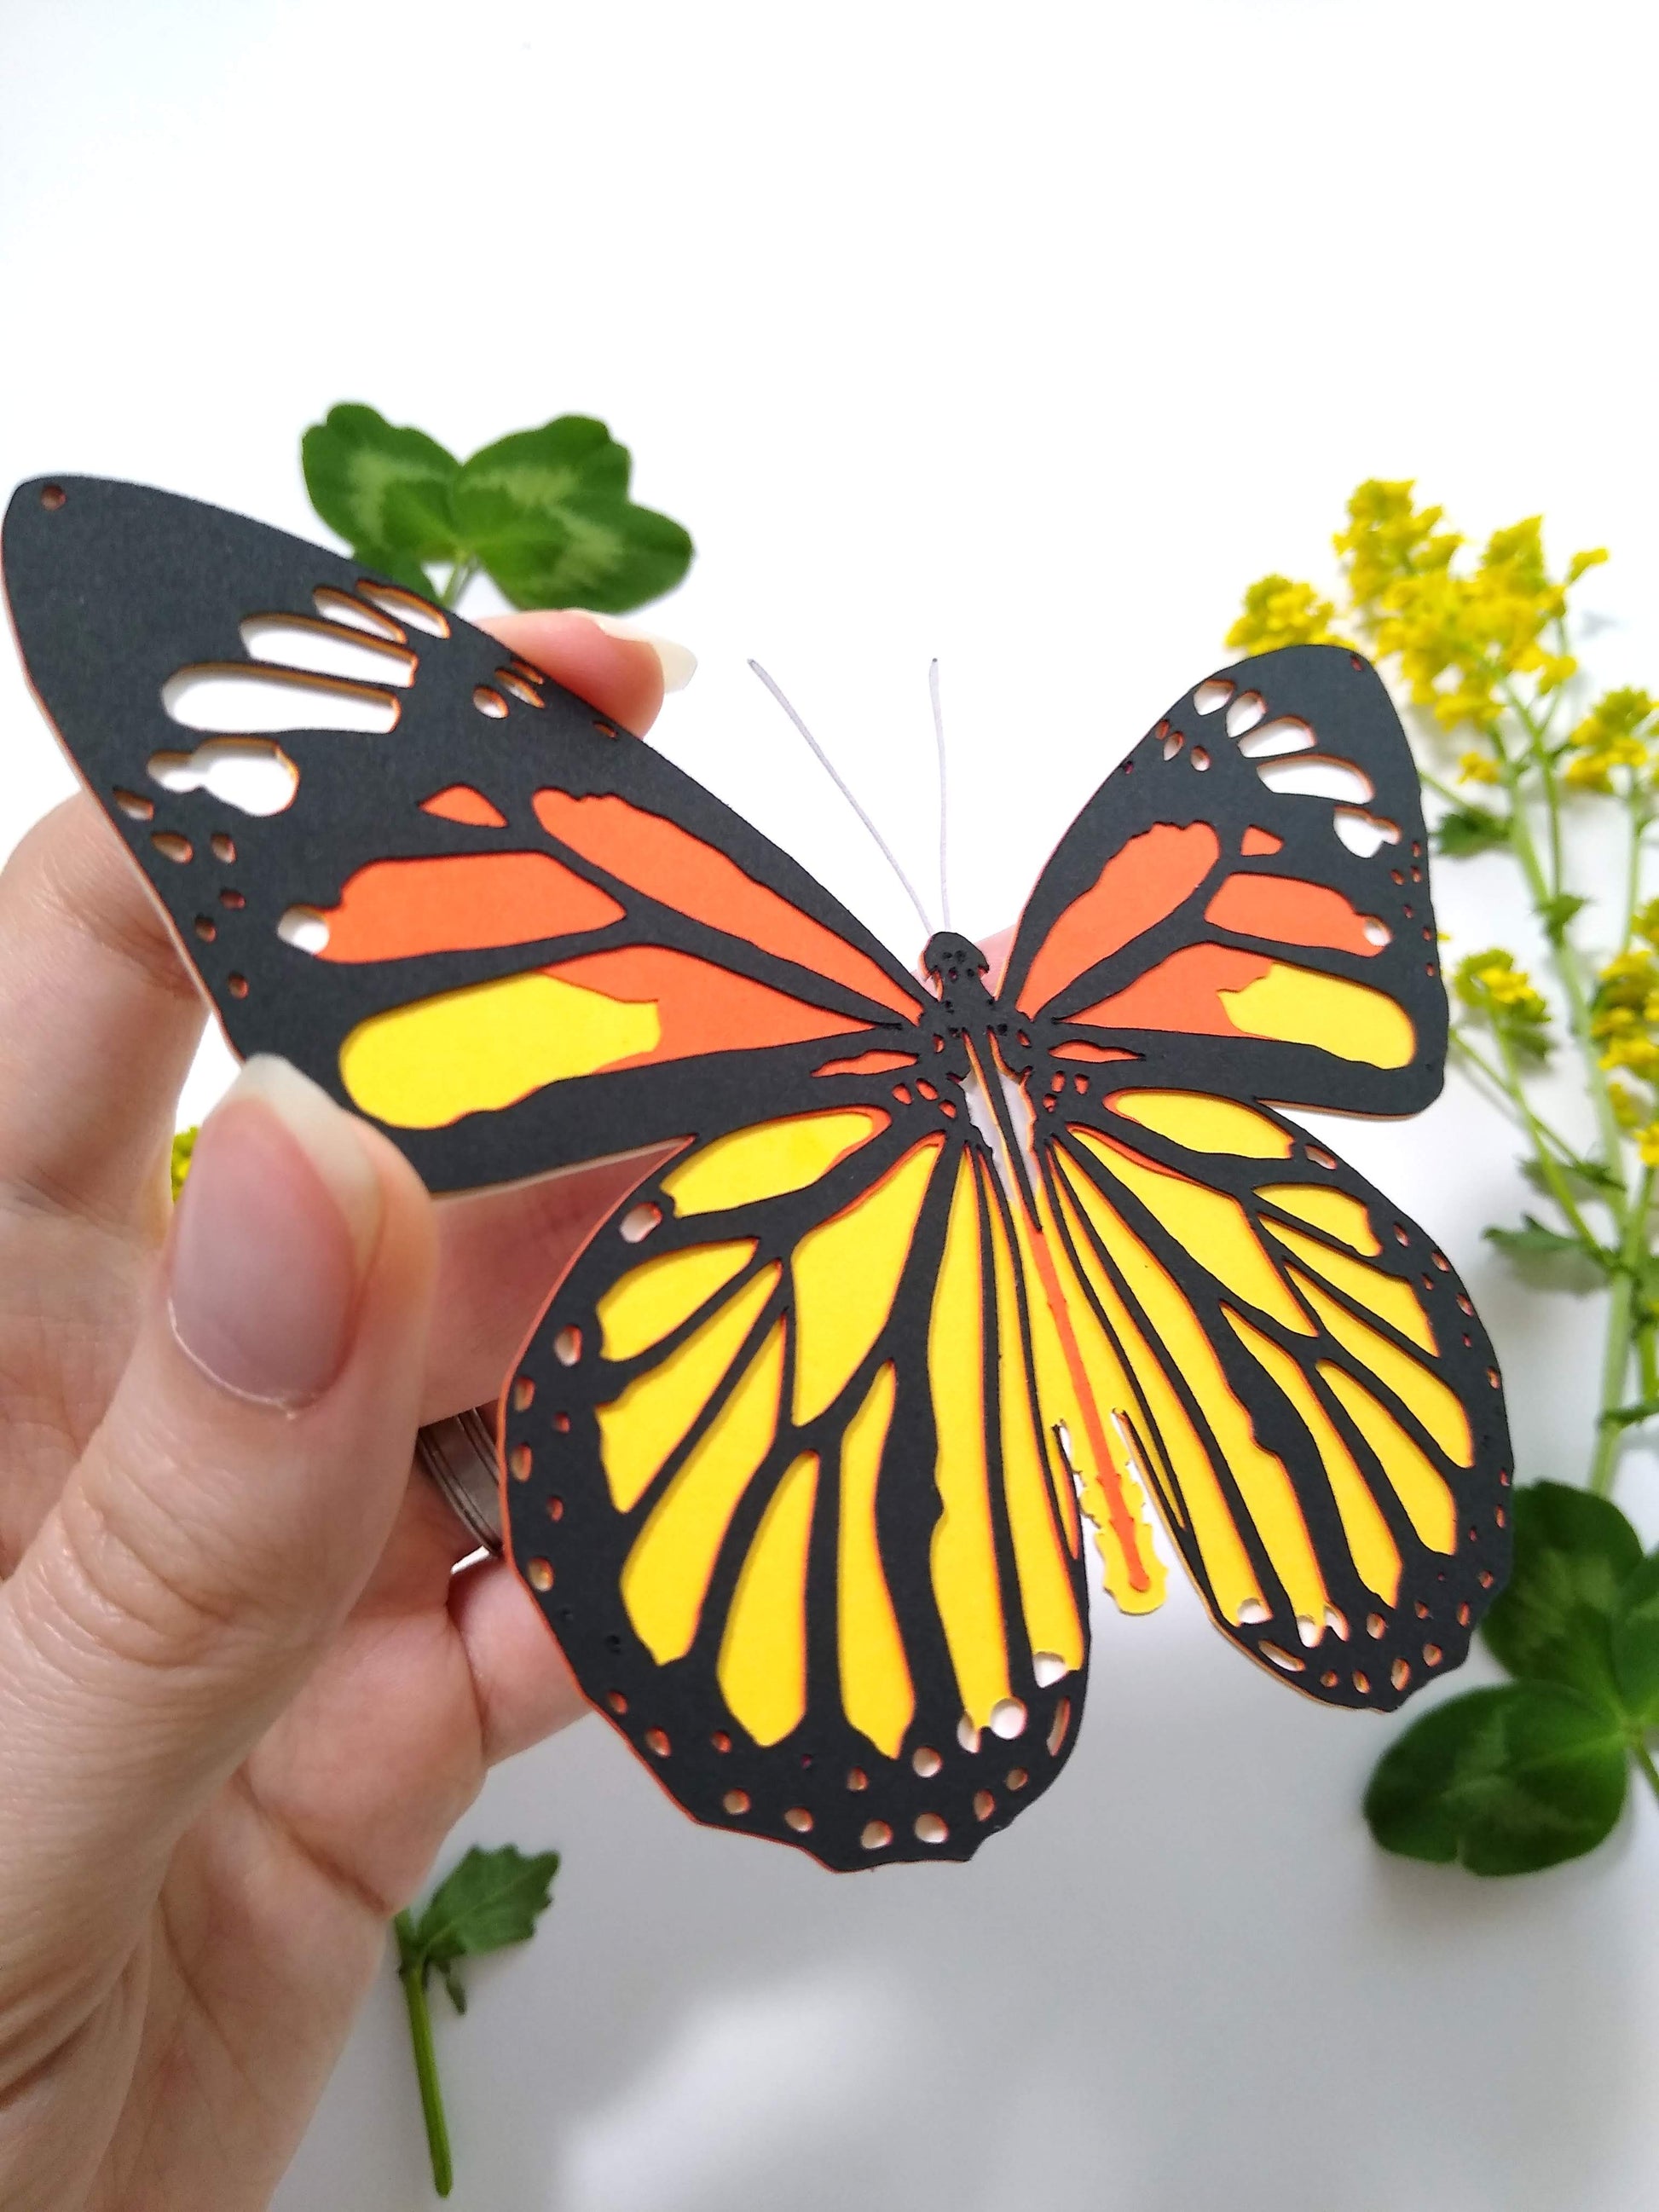 A hand holds a multi-layered paper butterfly to the camera, in the design of a Common Tiger butterfly. In the background are several sprigs of leaves and small yellow flowers.